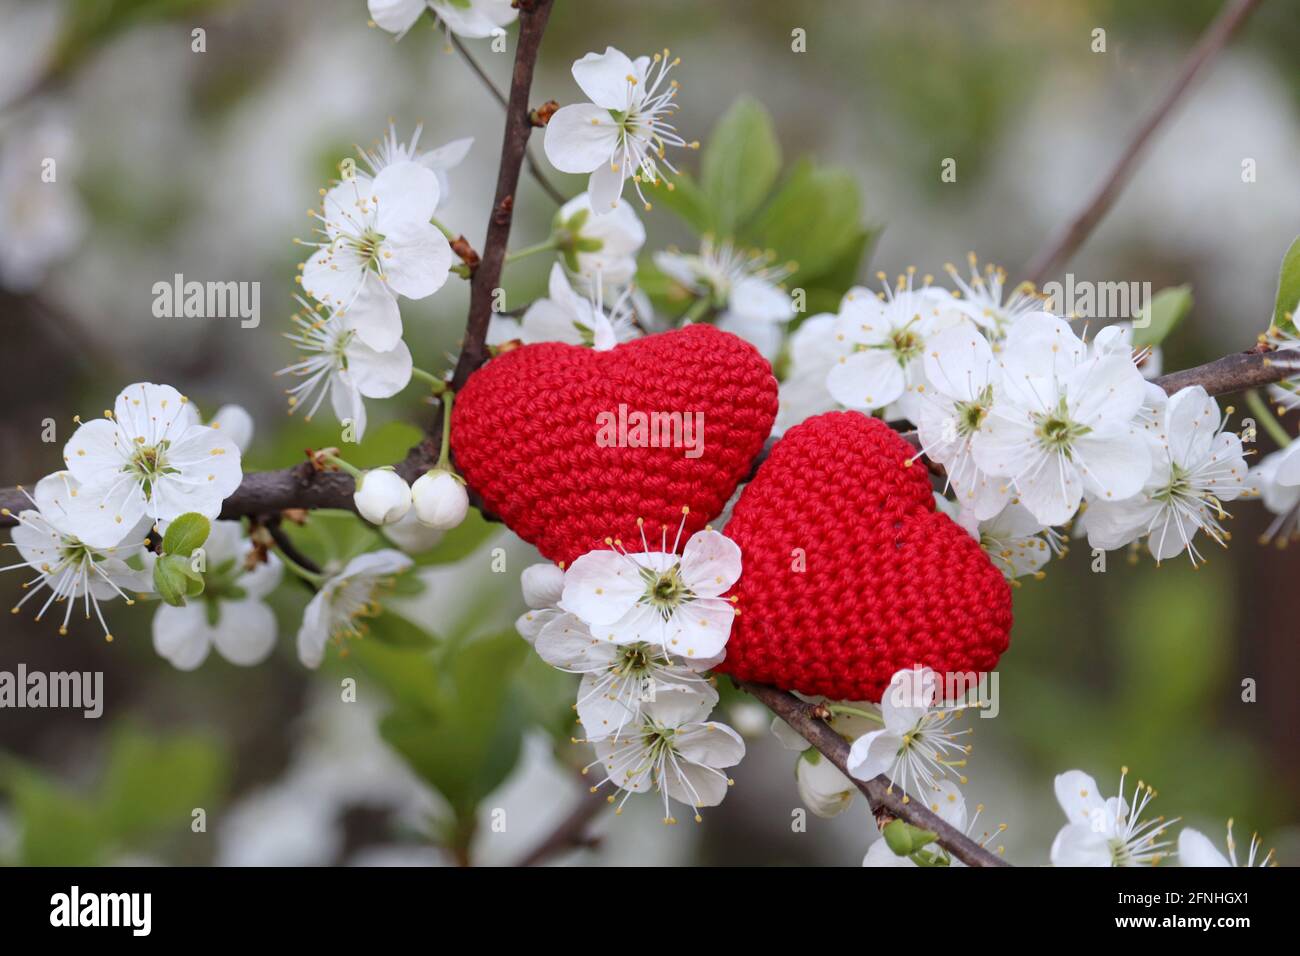 Love hearts and cherry blossom in spring. White flowers and red knitted symbol of passion on a branch in a blooming garden Stock Photo